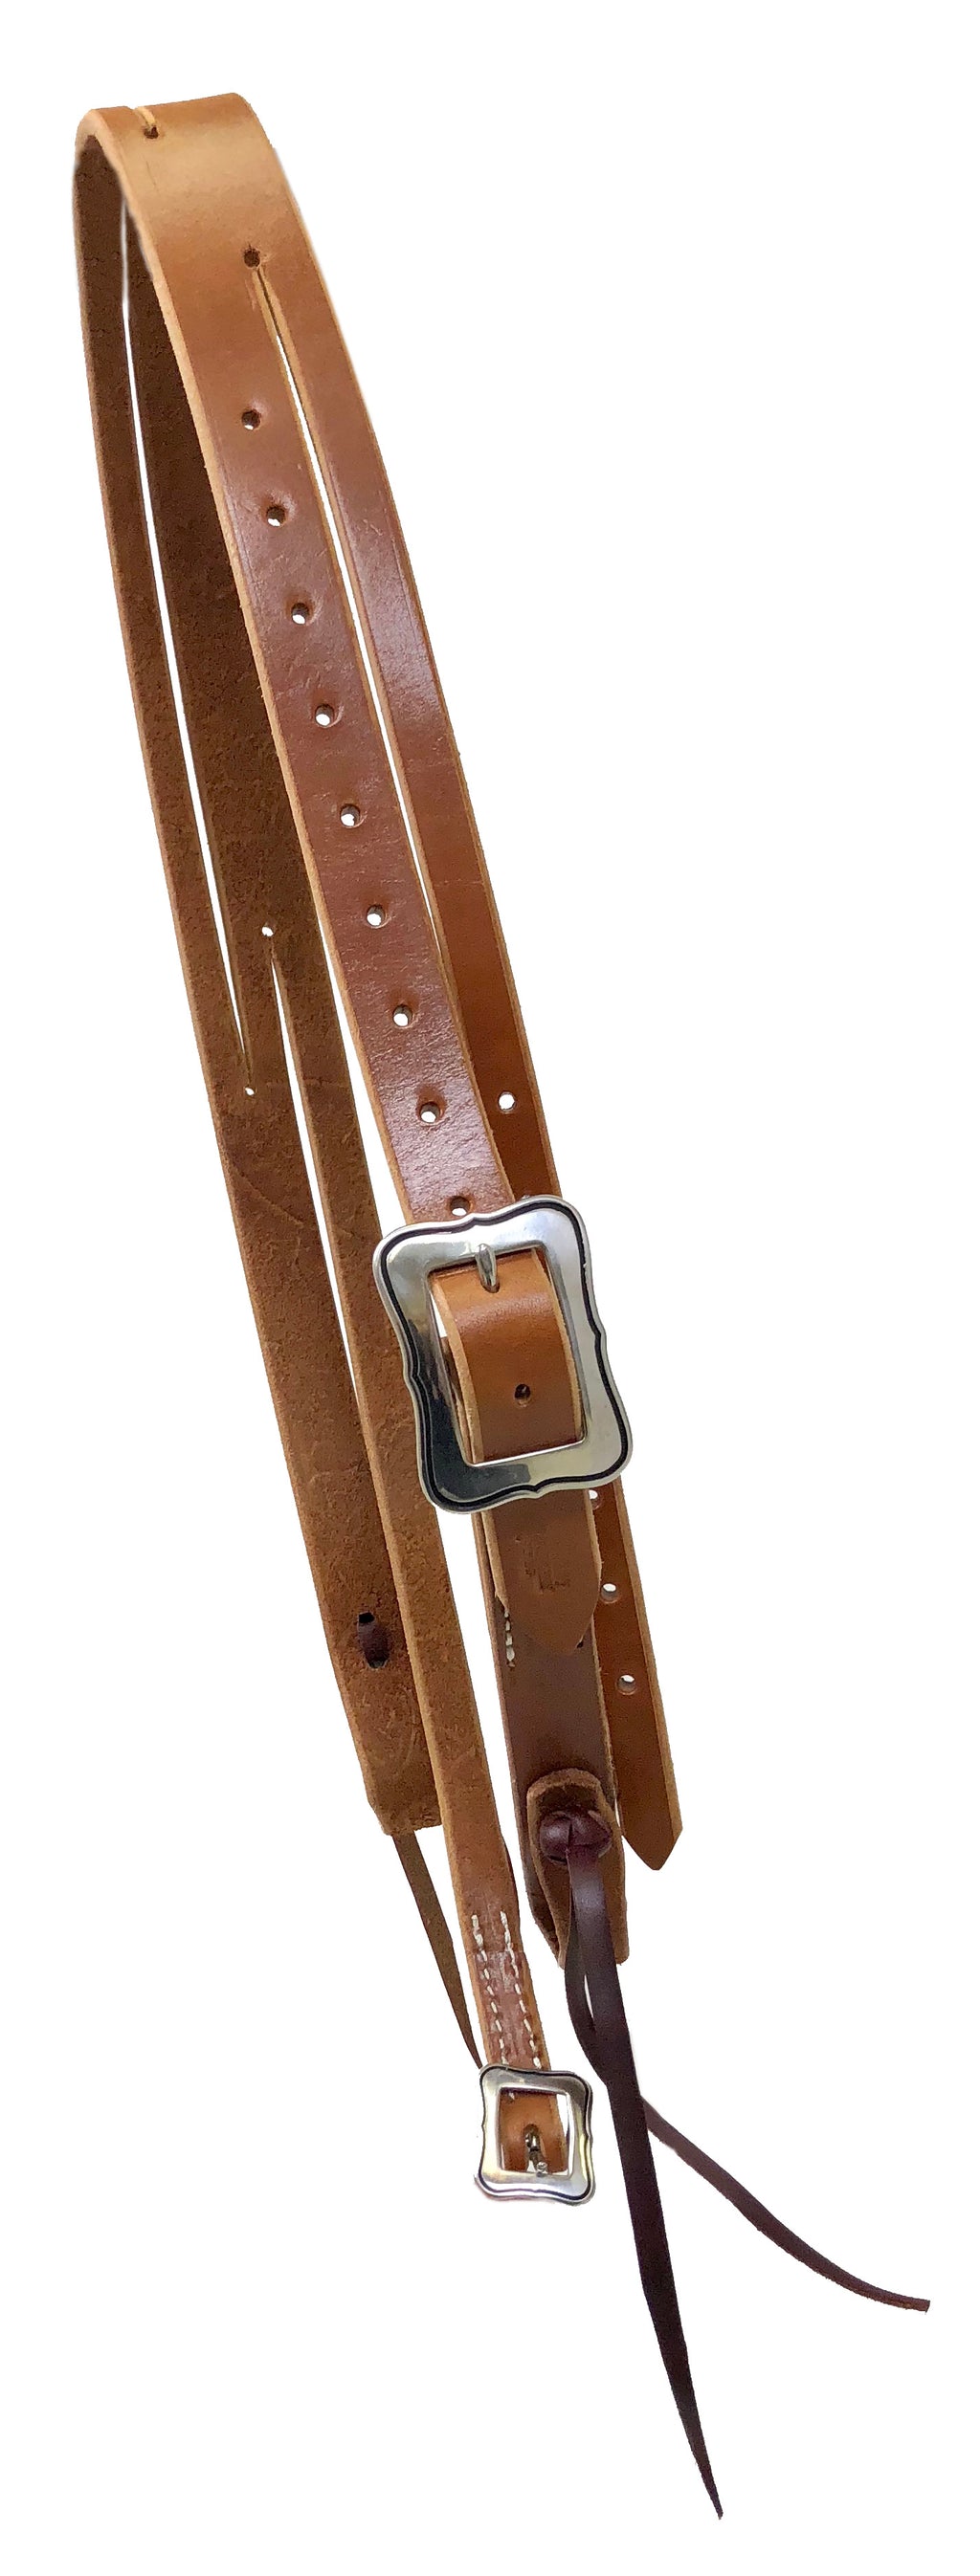 Pro Series 1 5/8" Extra Heavy Harness Slit Ear Headstall with Outline Hardware